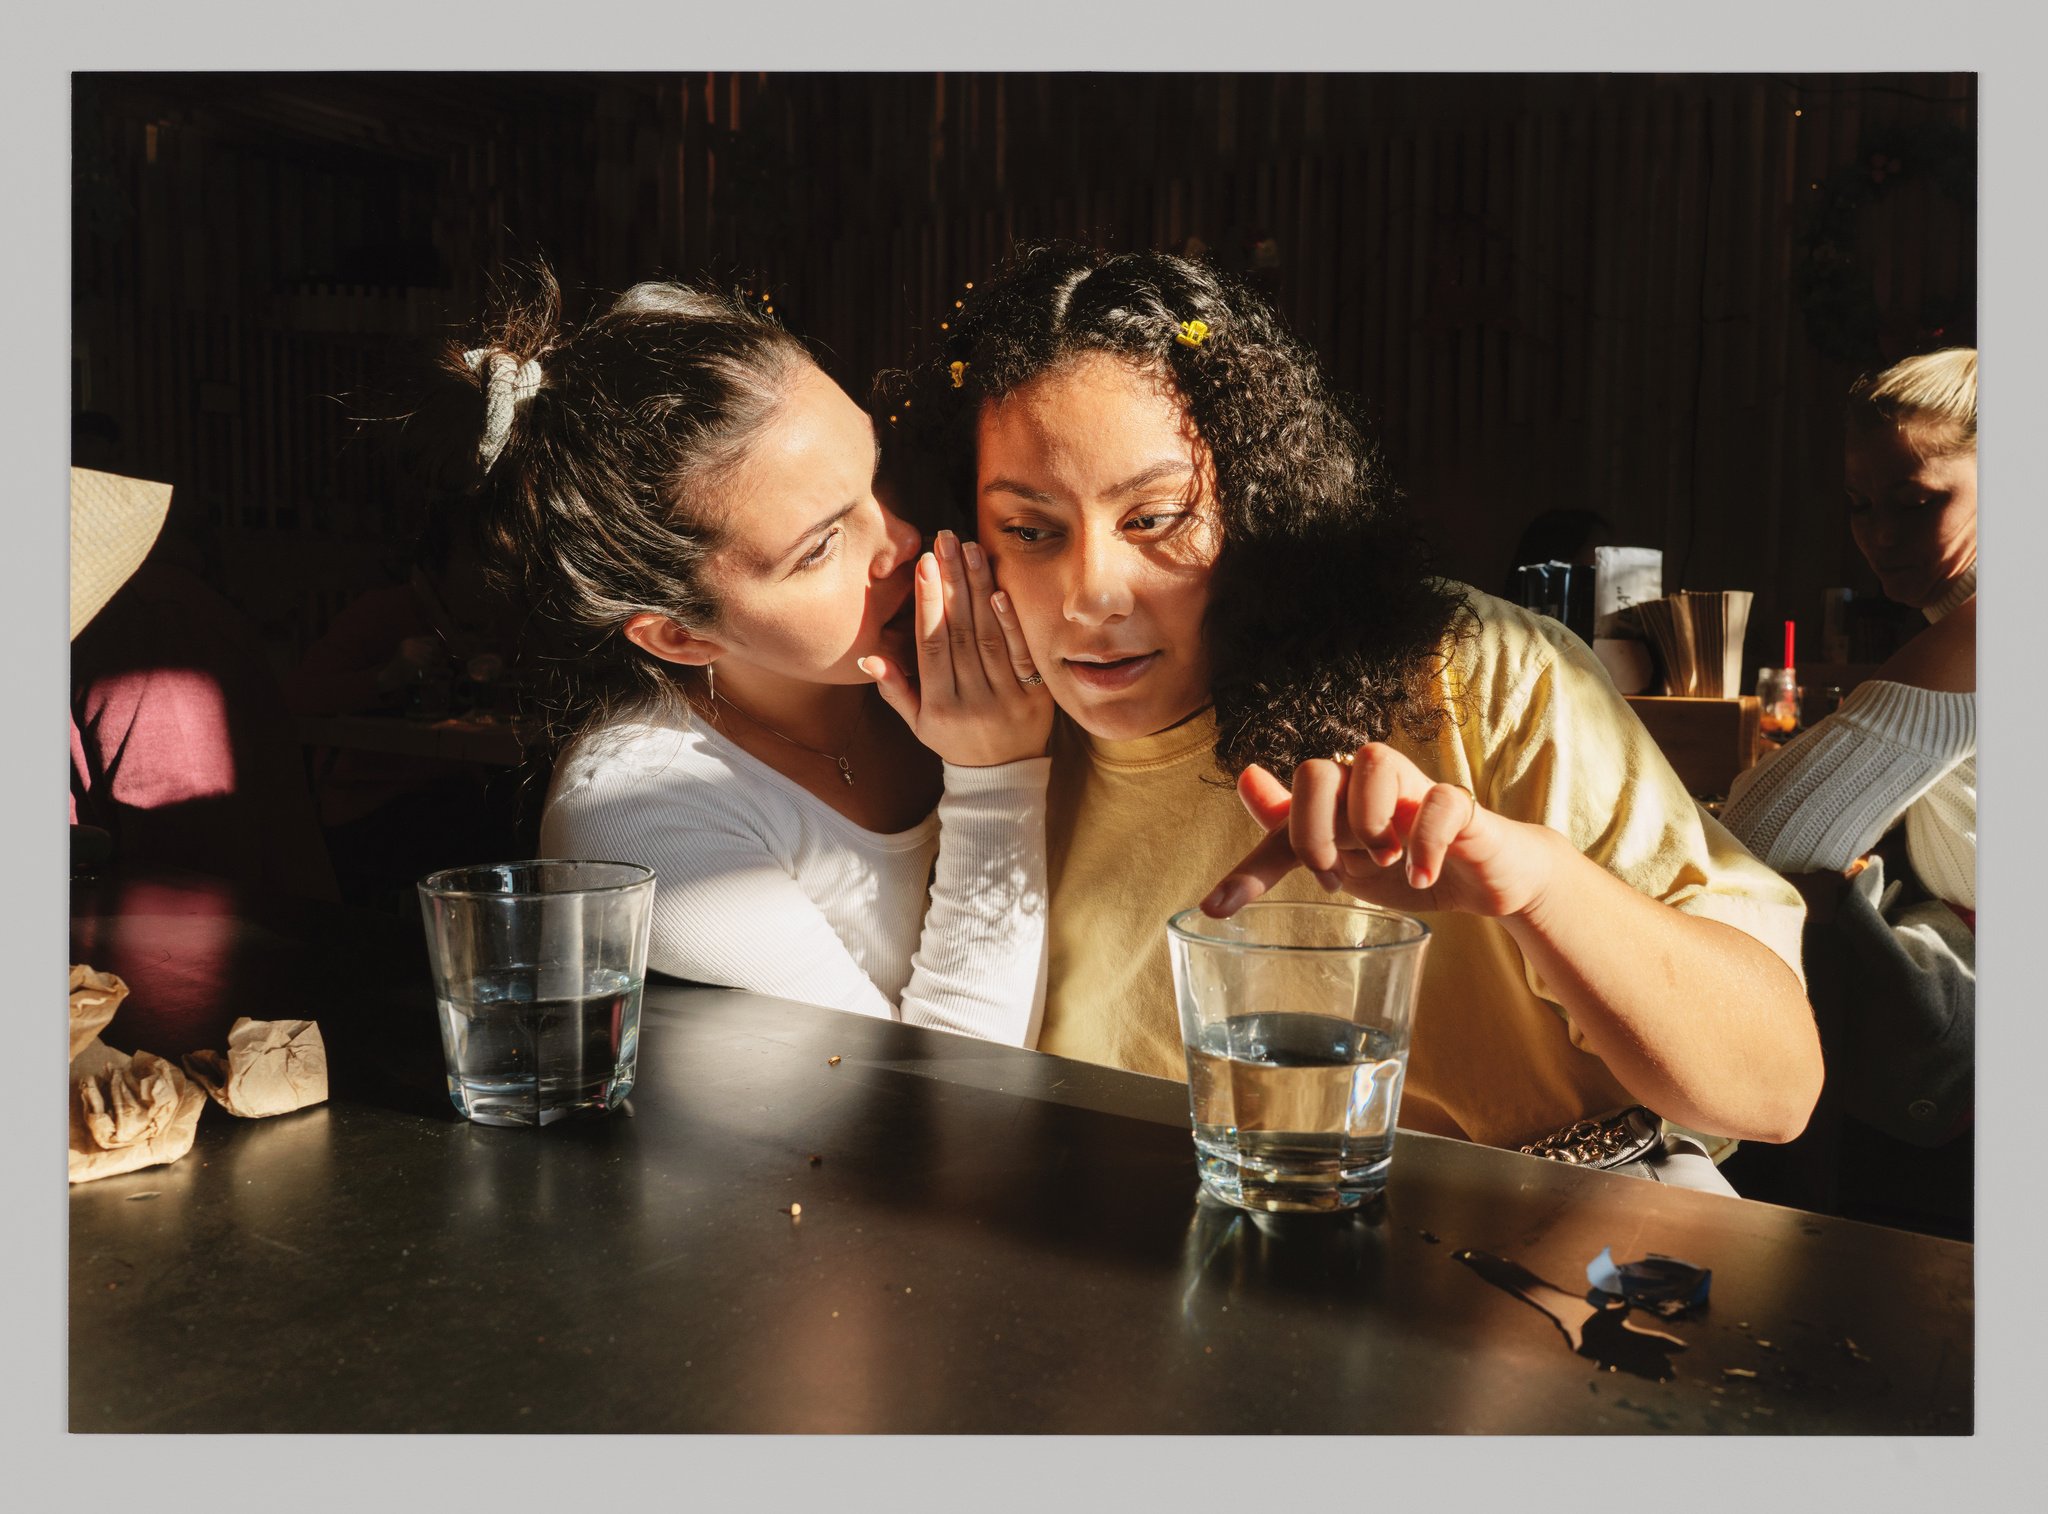 Two women sit at a bar with cups of water. One whispers into the other’s ear while she touches the rim of her glass.